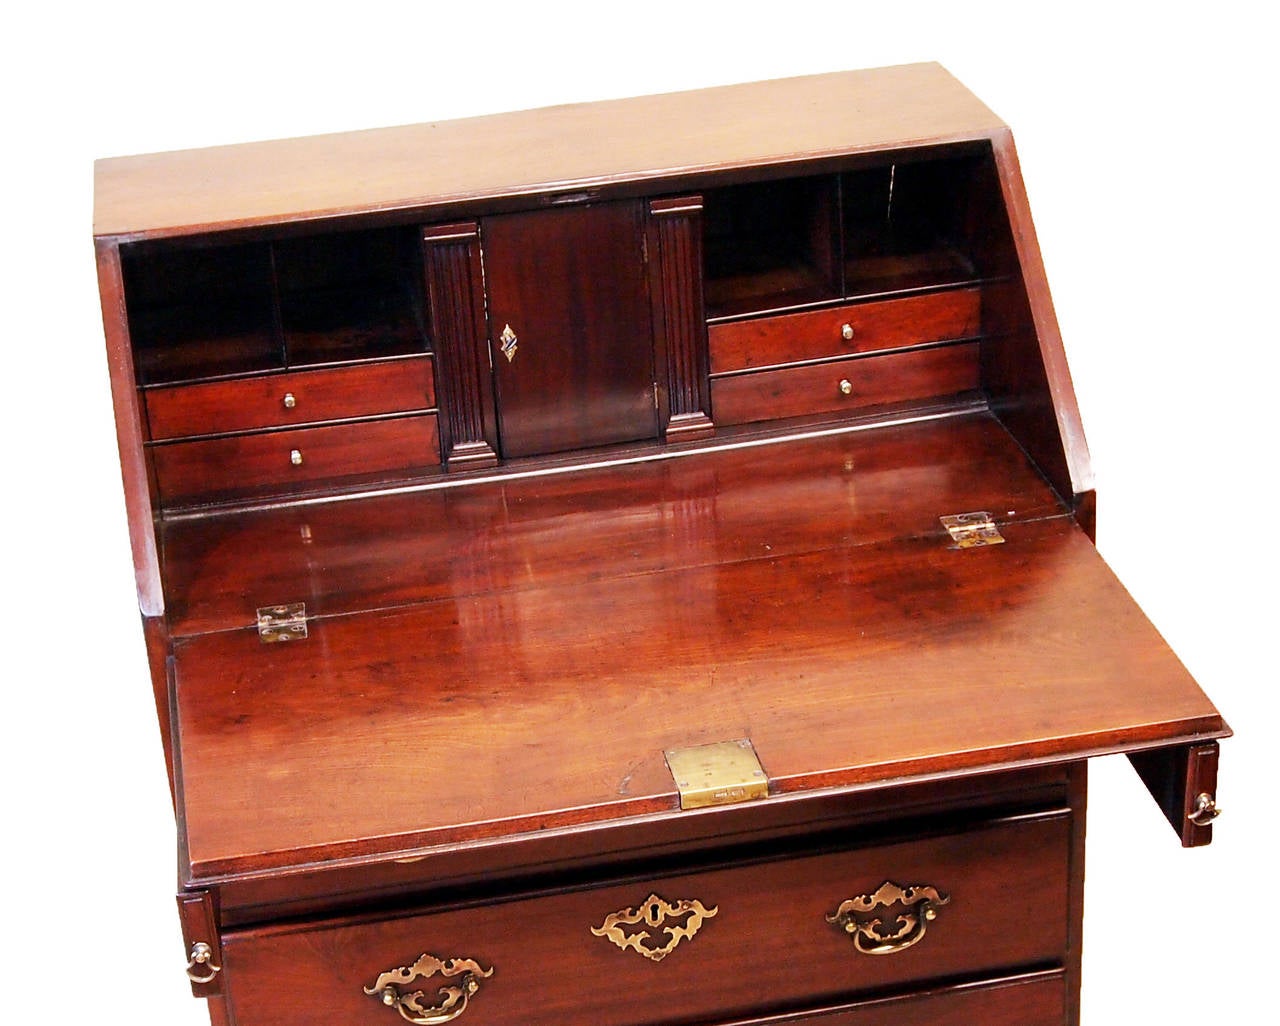 A Delightful George II Period Mahogany Bureau Of Diminutive 
Proportions Having Superbly Figured Fall Front Above Four Long 
Drawers With Original Brass Open Plate Handles Raised On Original 
Ogee Feet